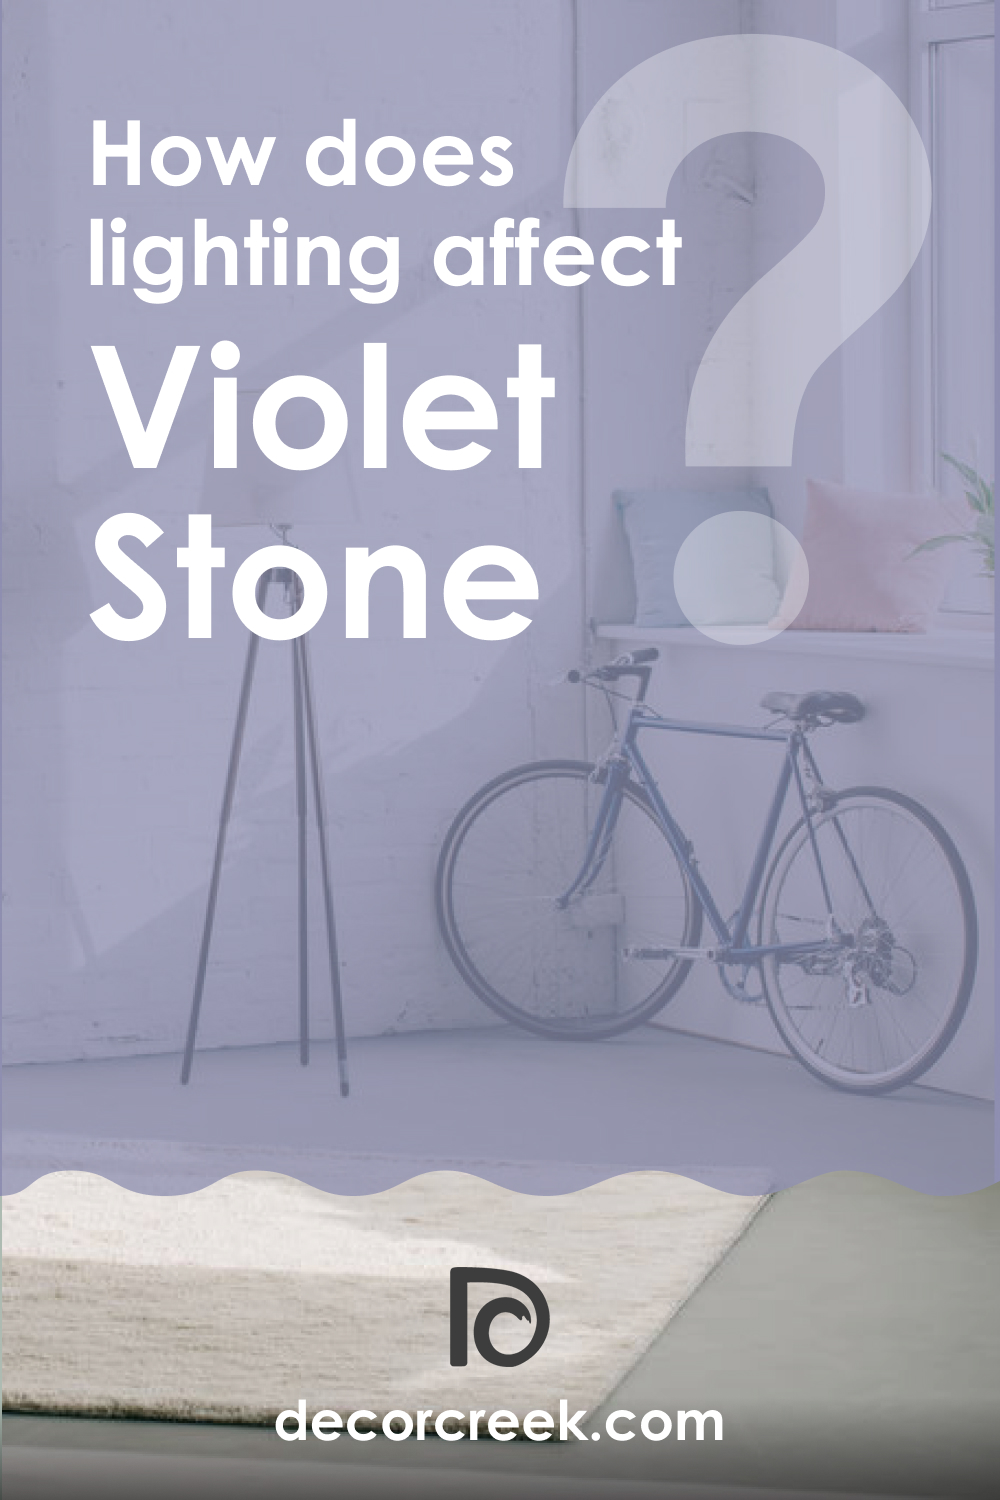 How Does Lighting Affect Violet Stone 2069-40?